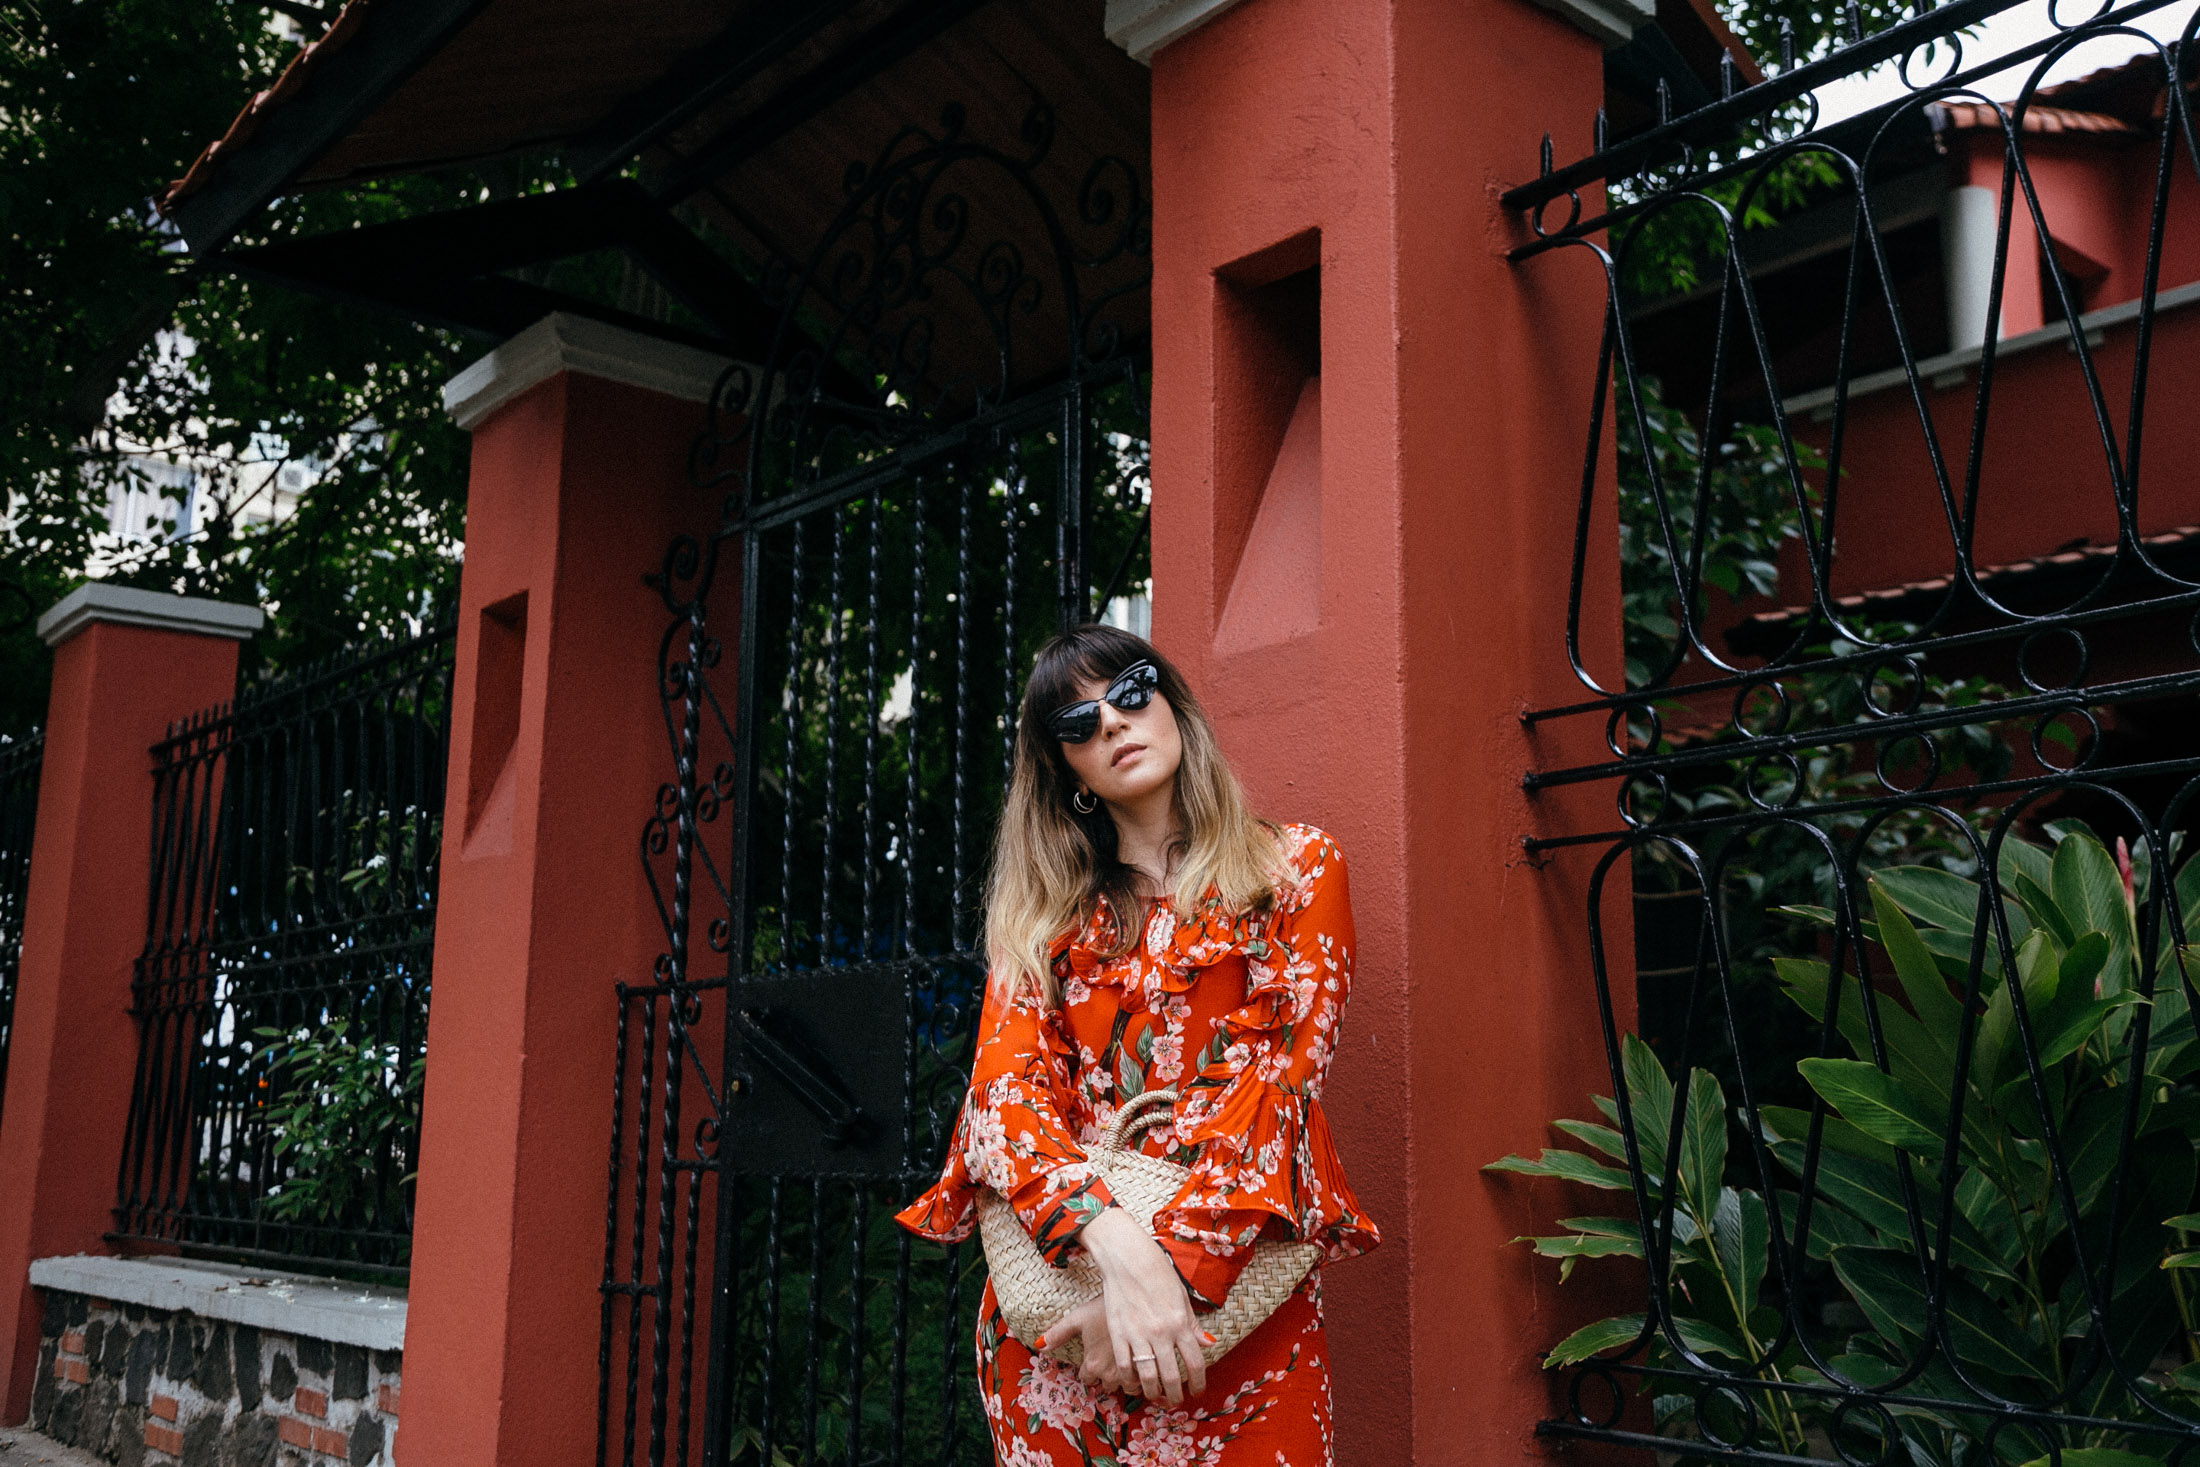 Maristella wears a red floral dress and straw bag